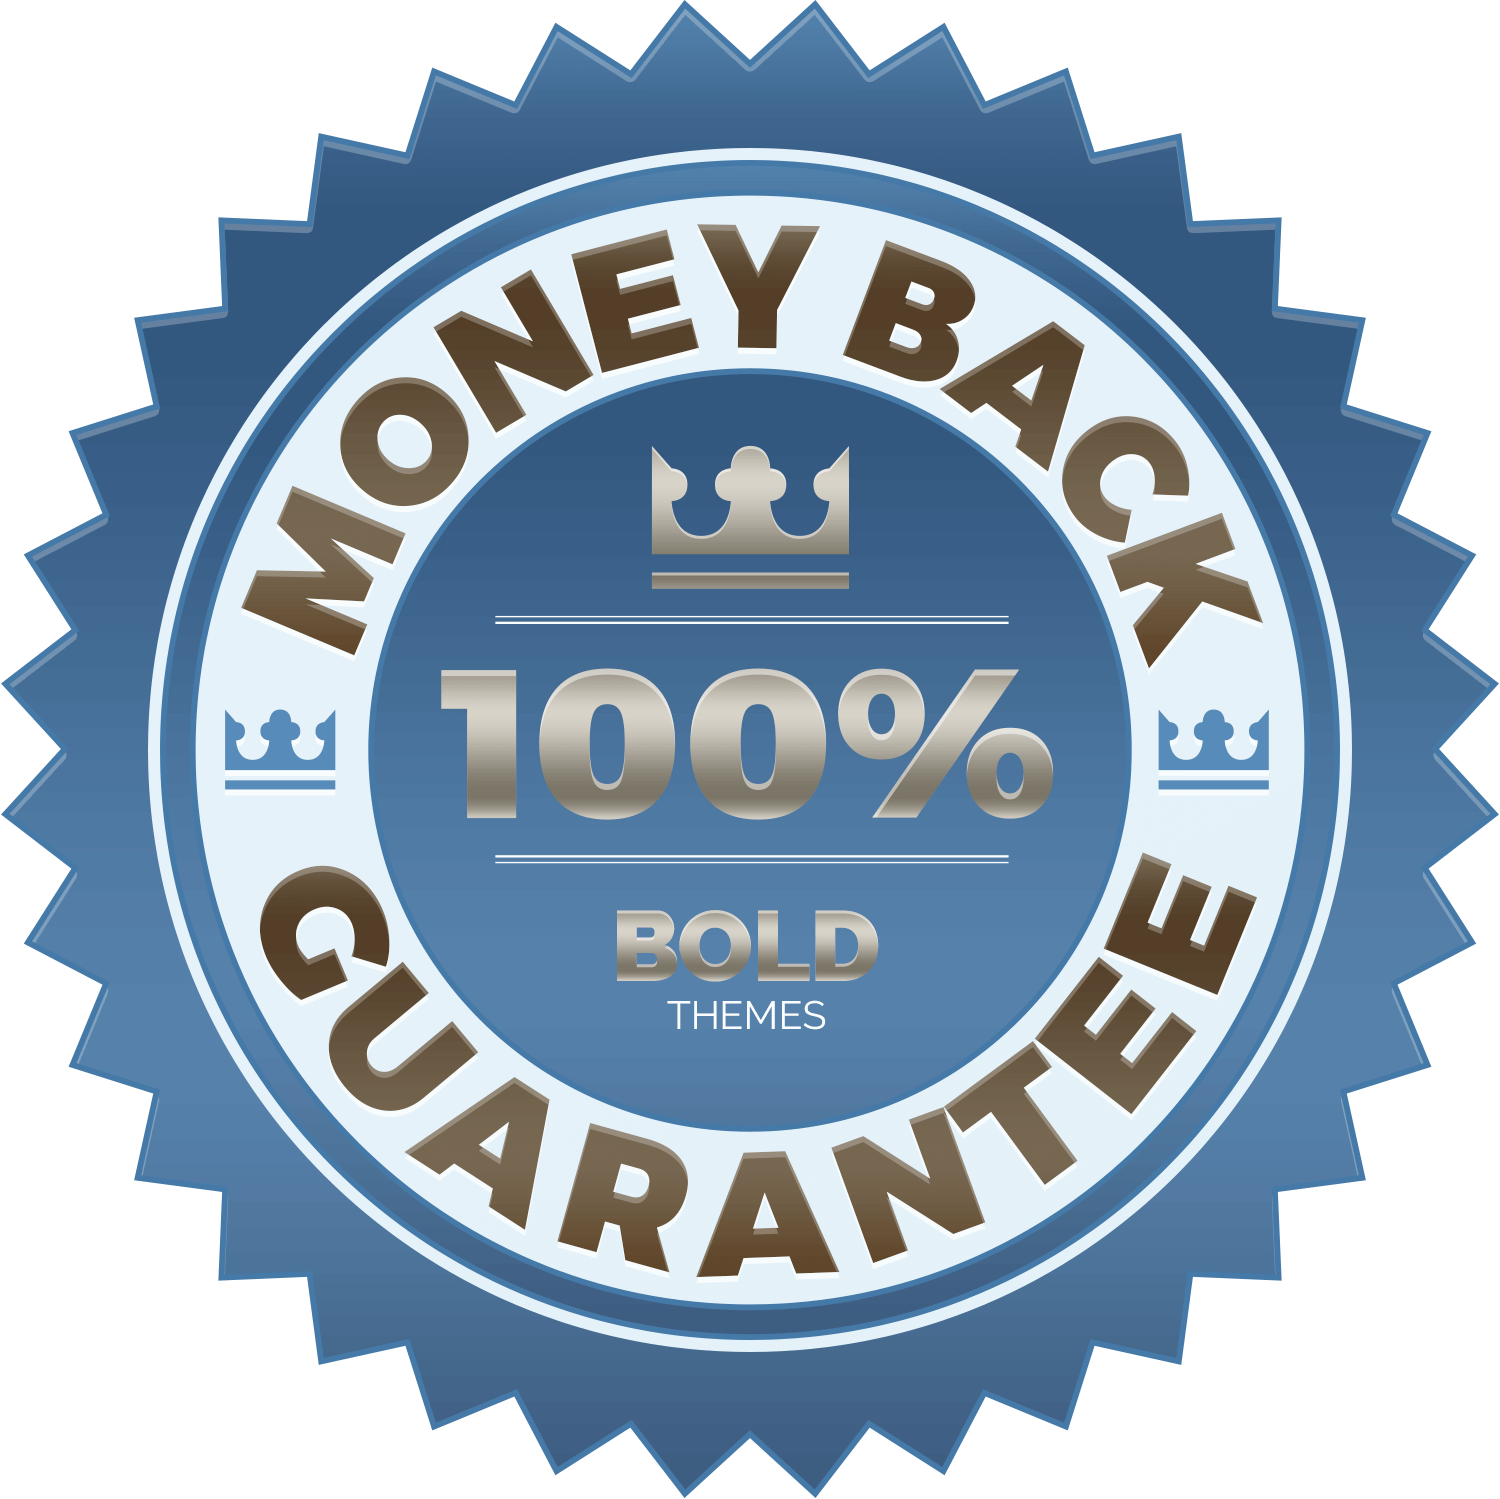 https://northcorp.ae/wp-content/uploads/2017/05/Money-back-guarantee.png